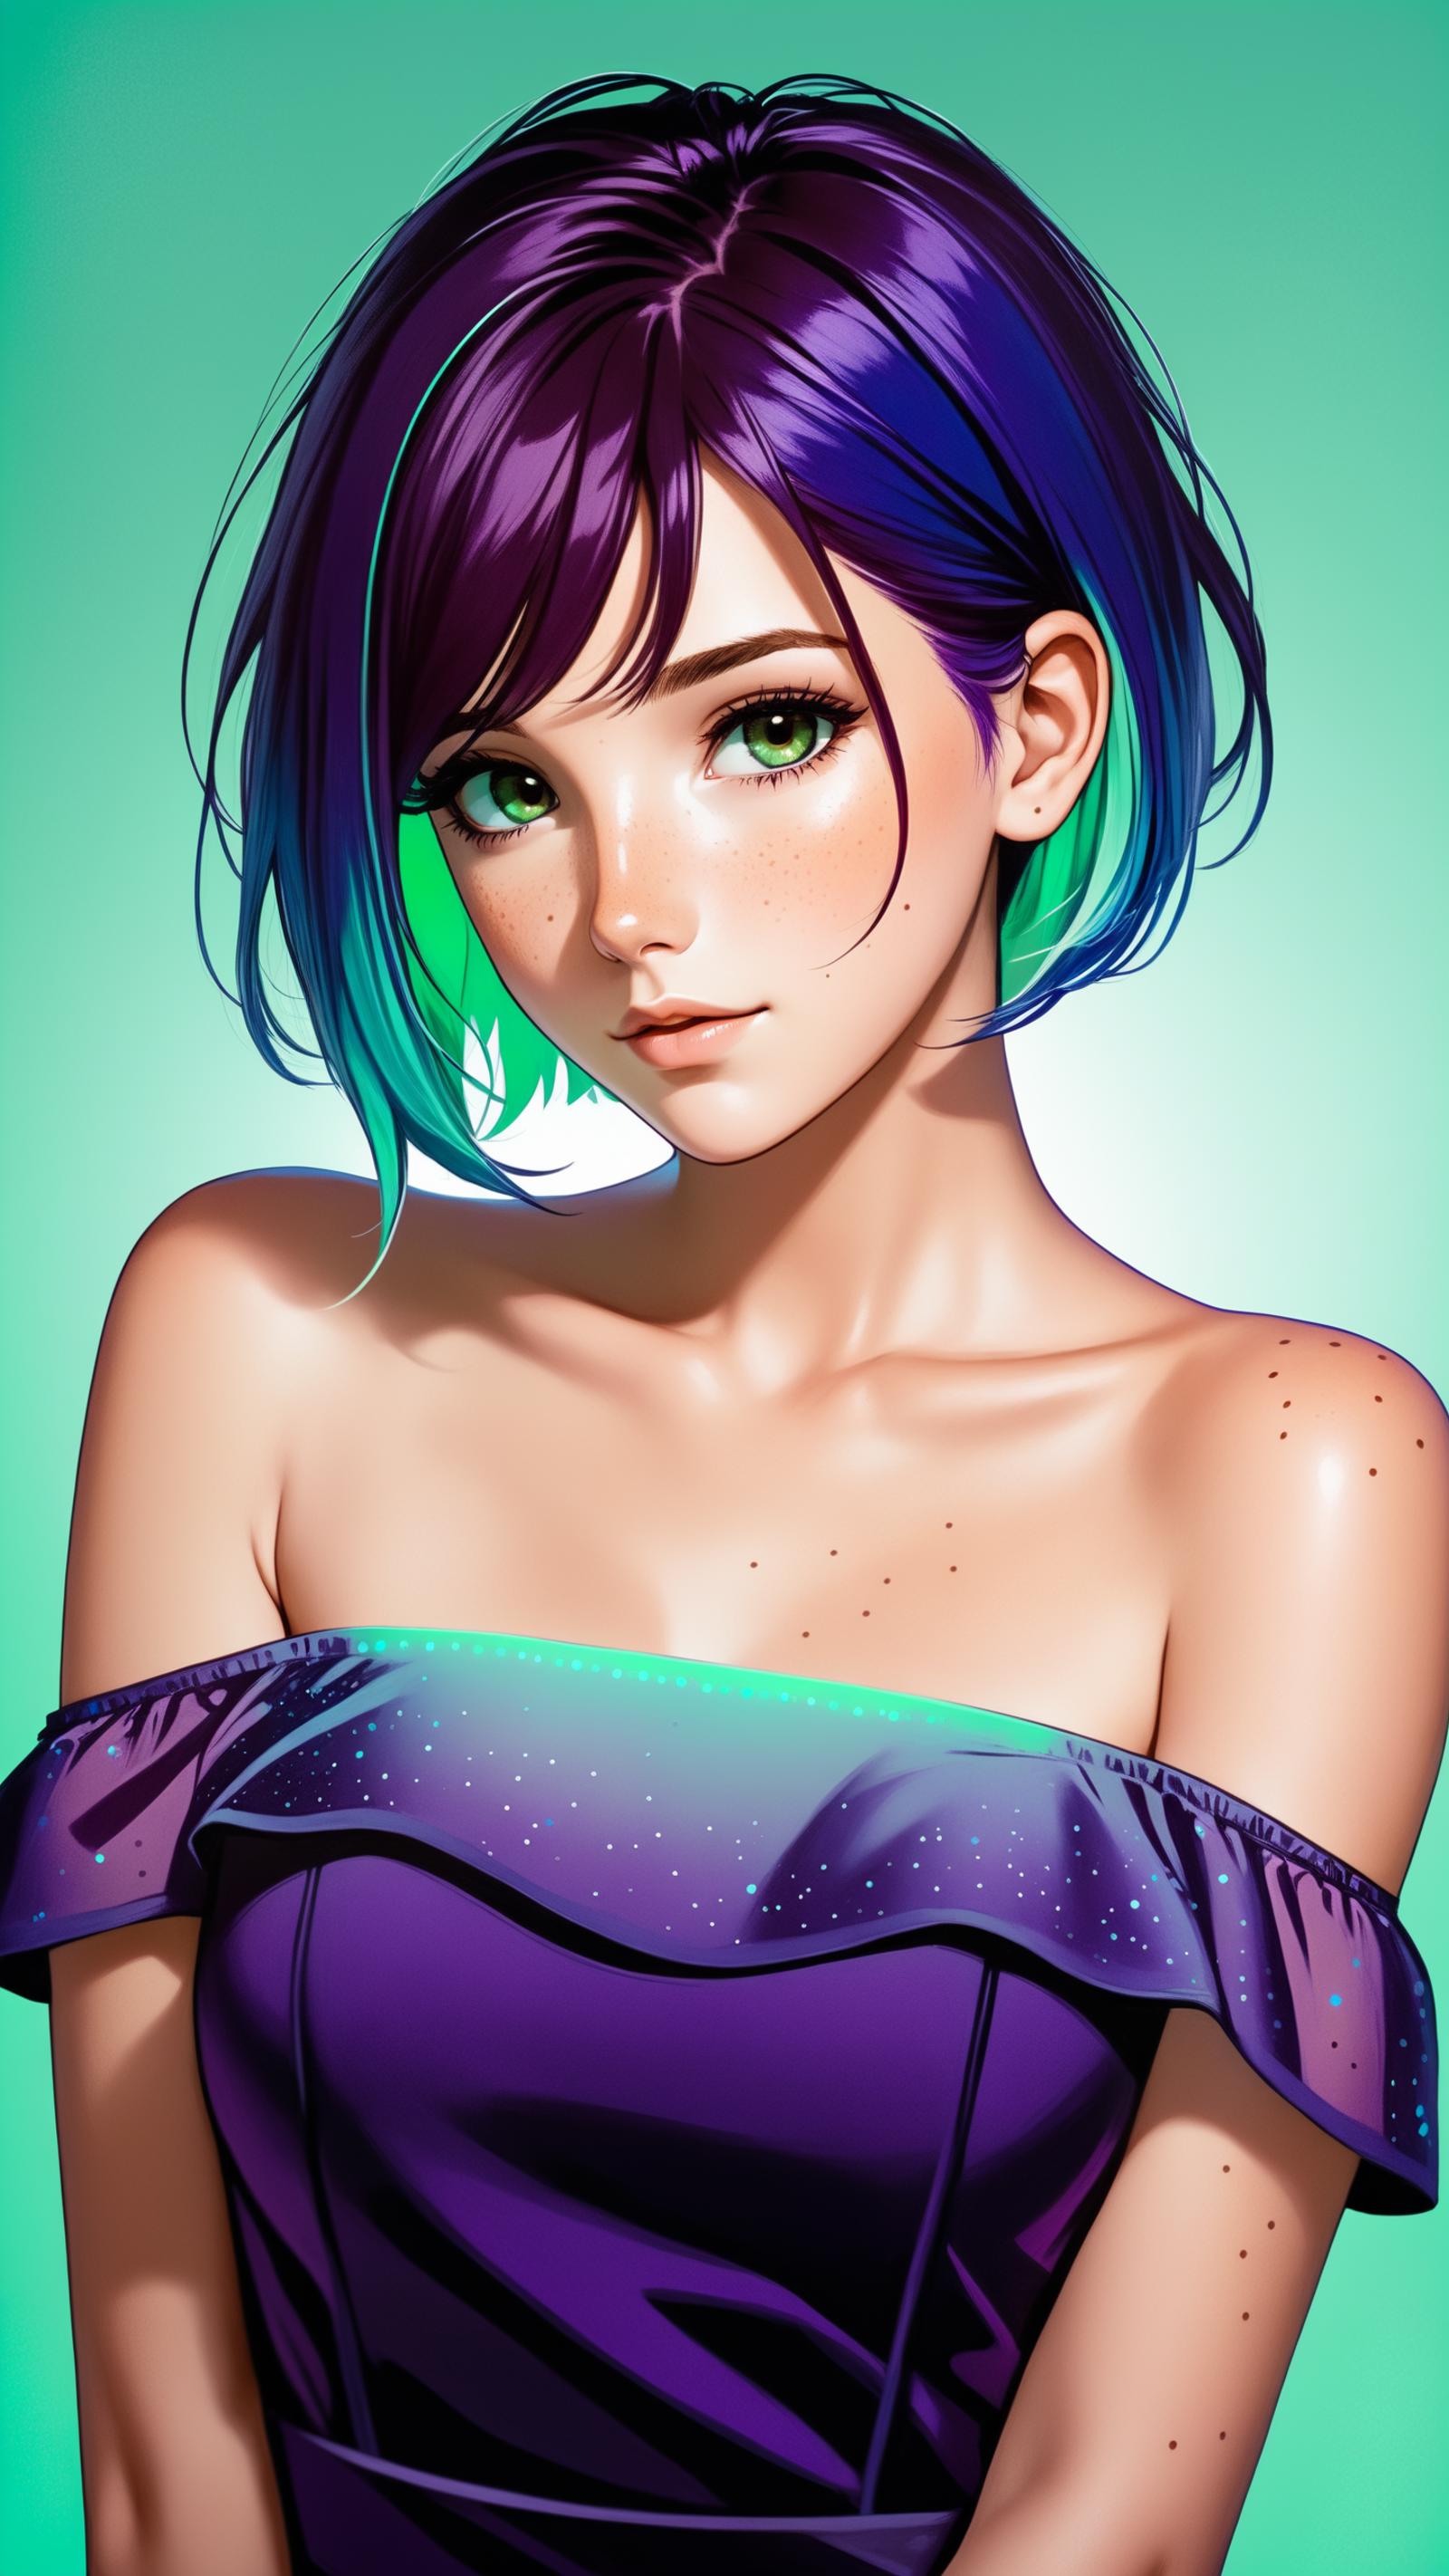 Anime girl with green eyes and purple hair in a purple dress.